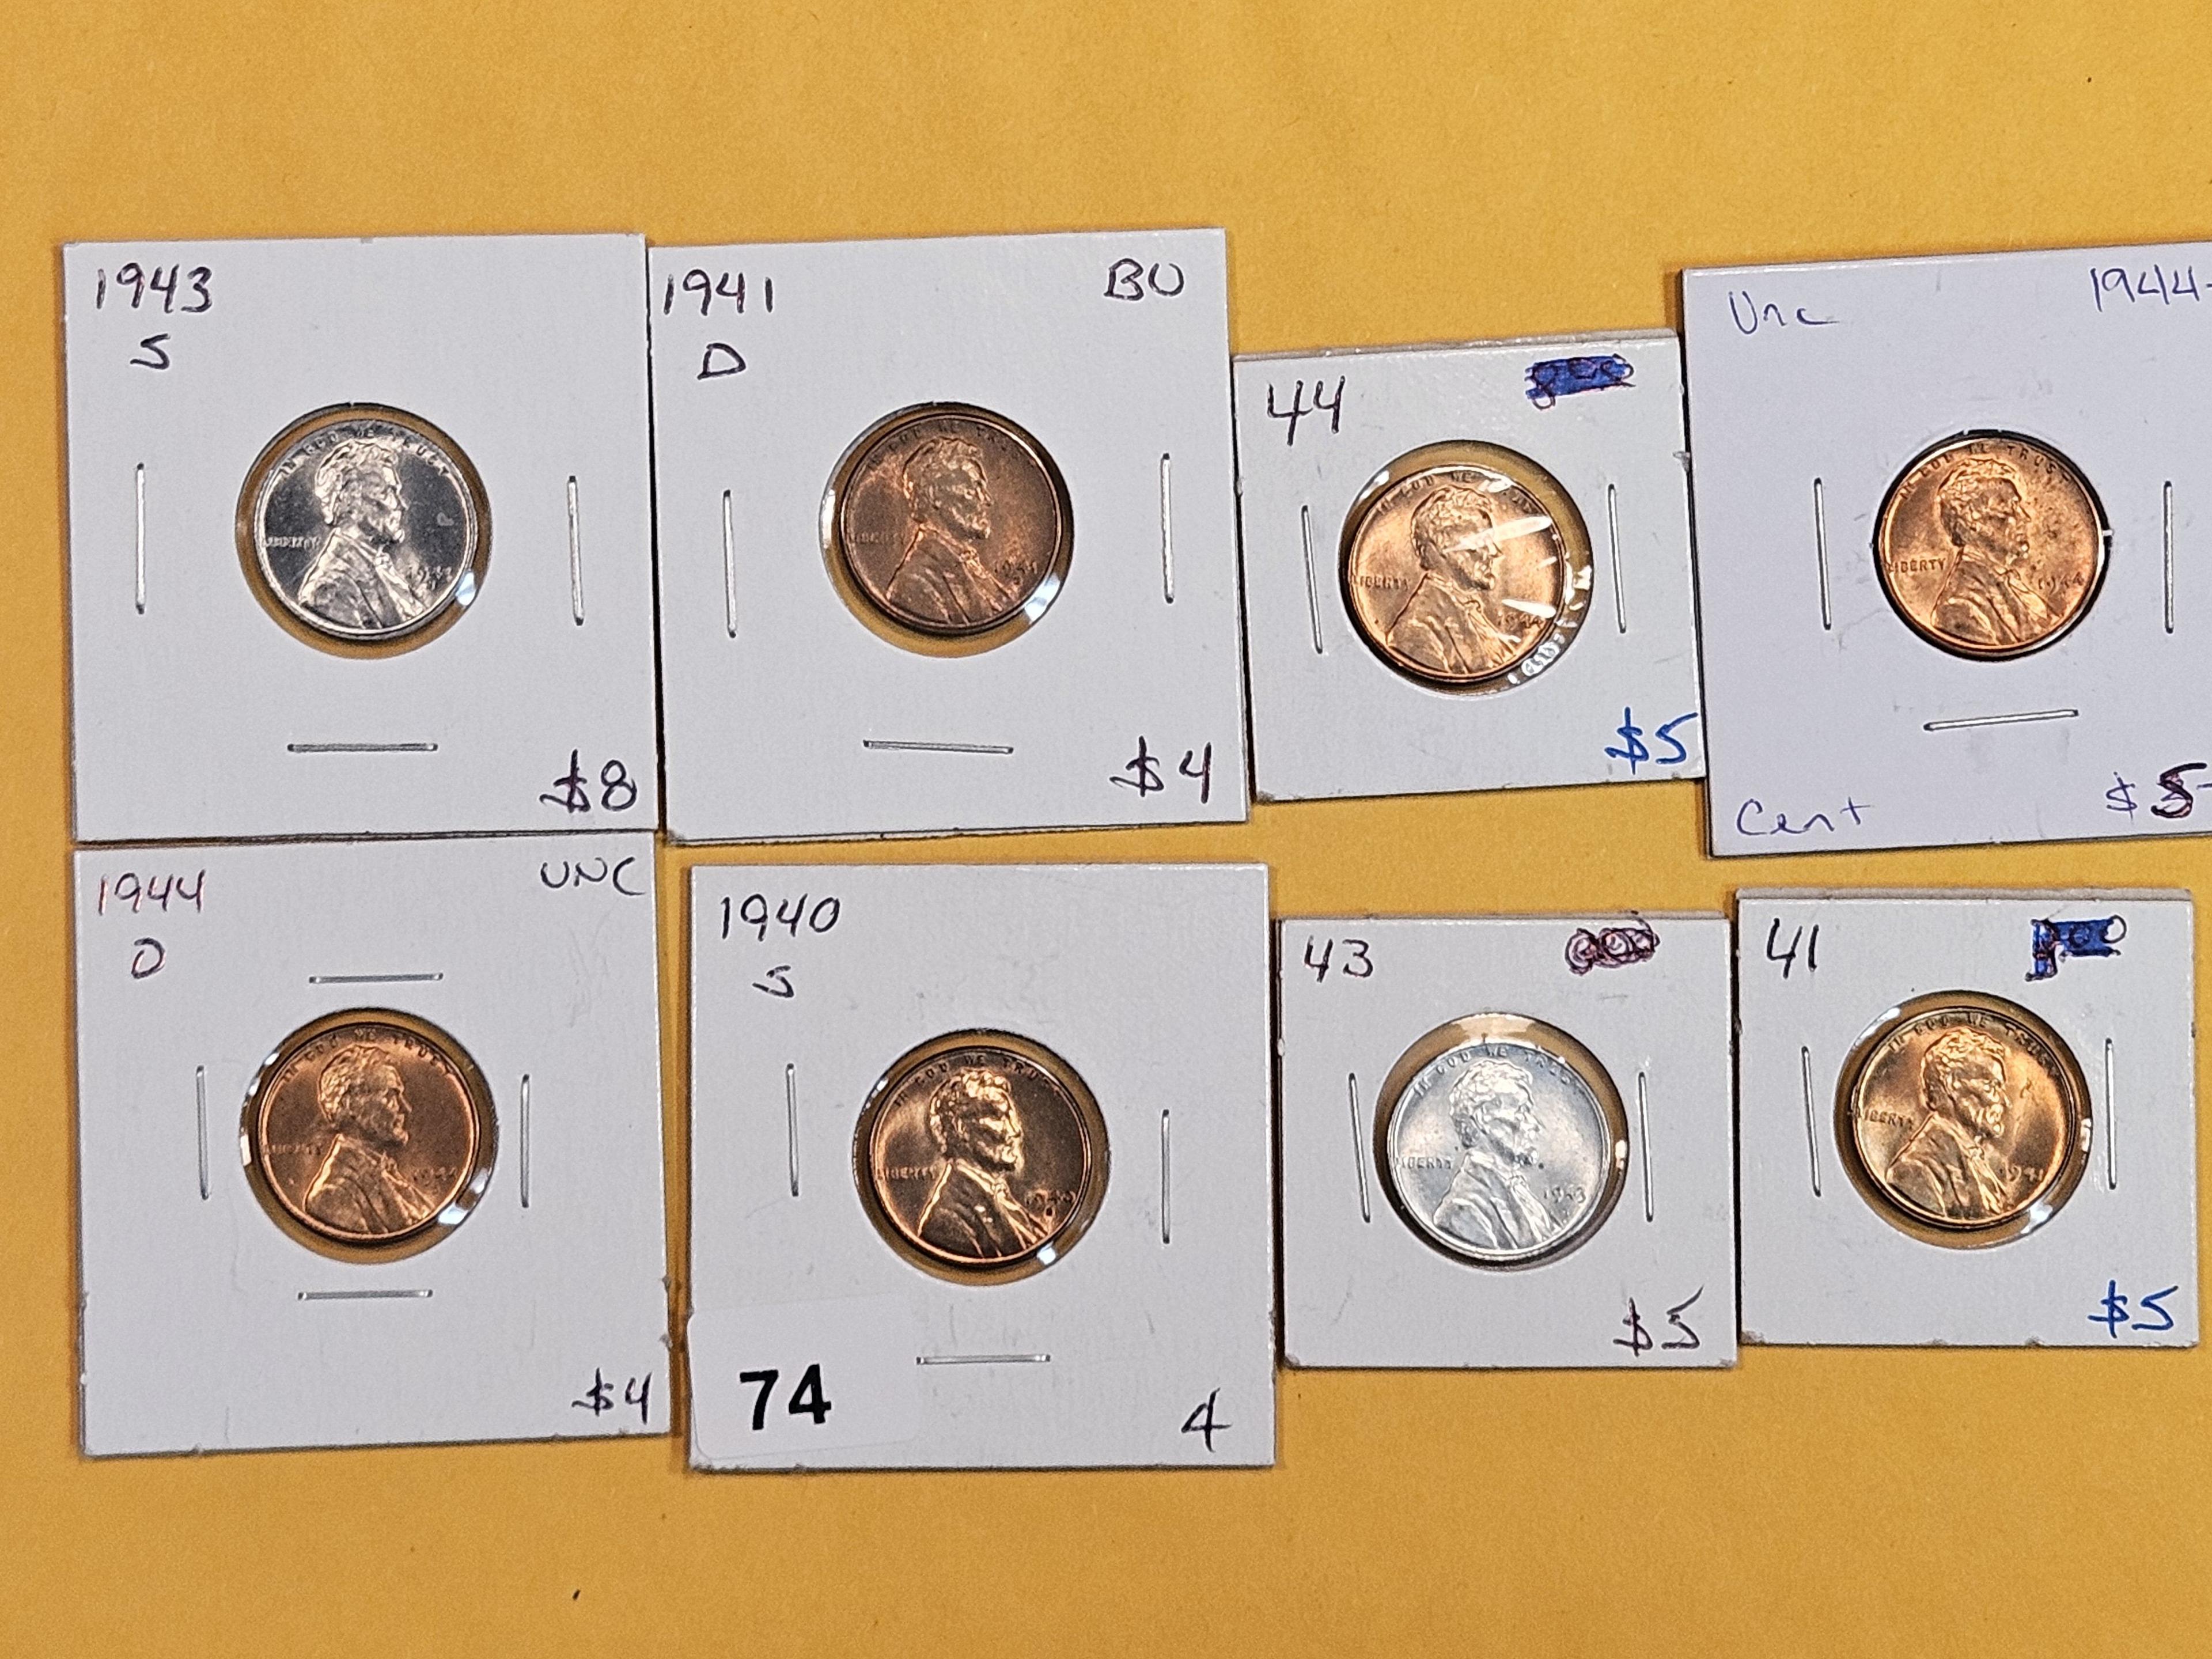 Eight Very Choice to GEM Brilliant uncirculated Wheat Cents